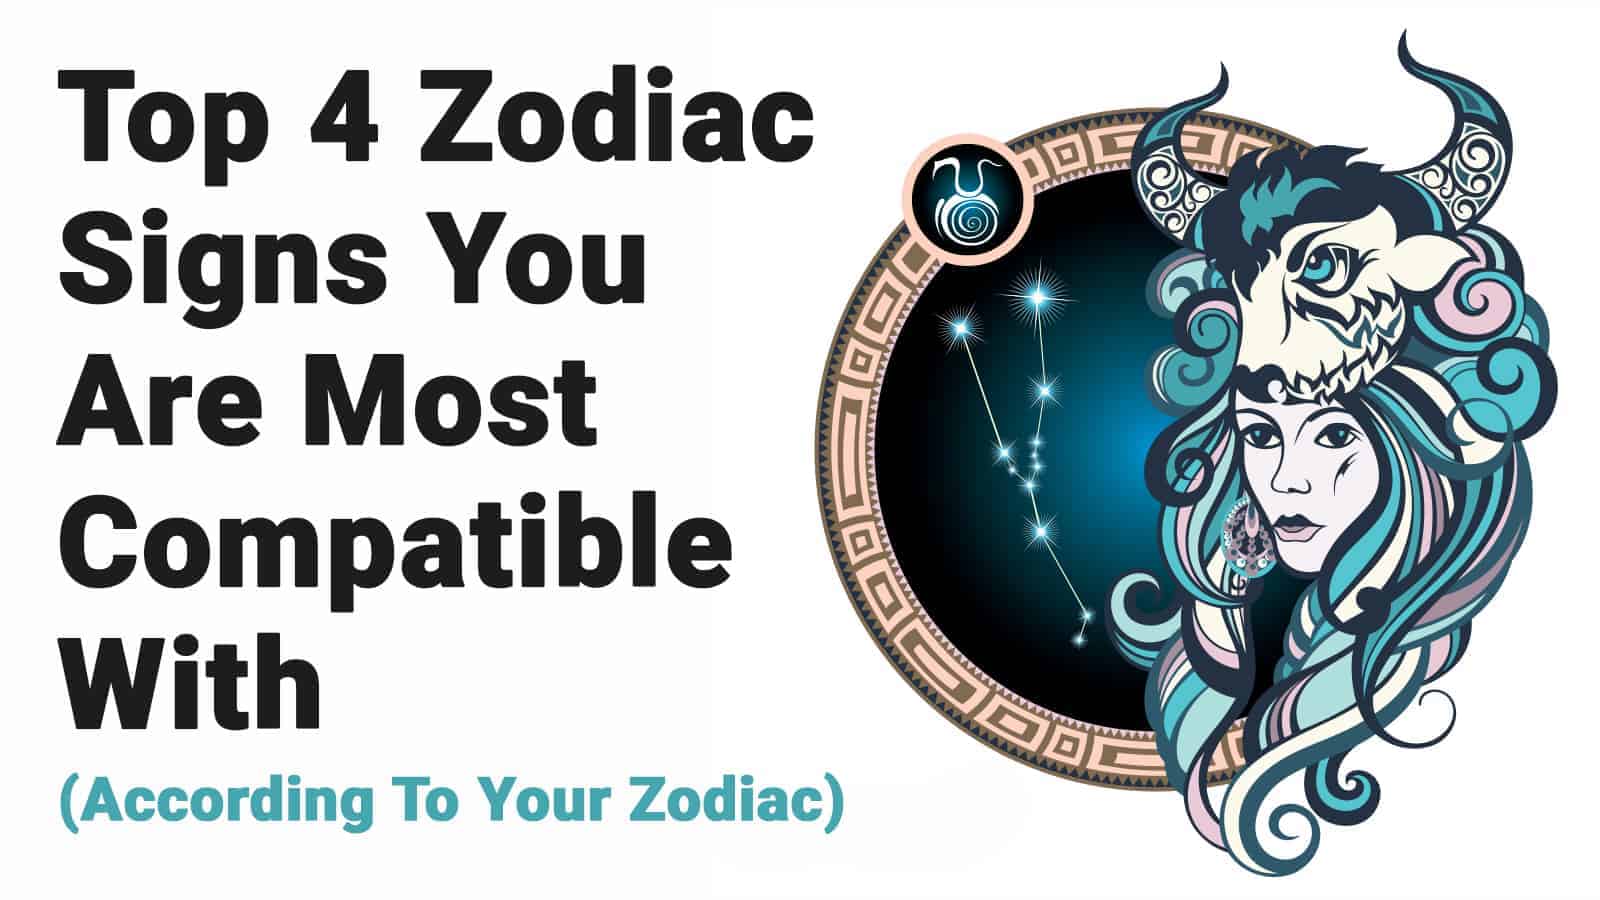 Top 4 Zodiac Signs That You Are Most Compatible With According To Your Zodi...